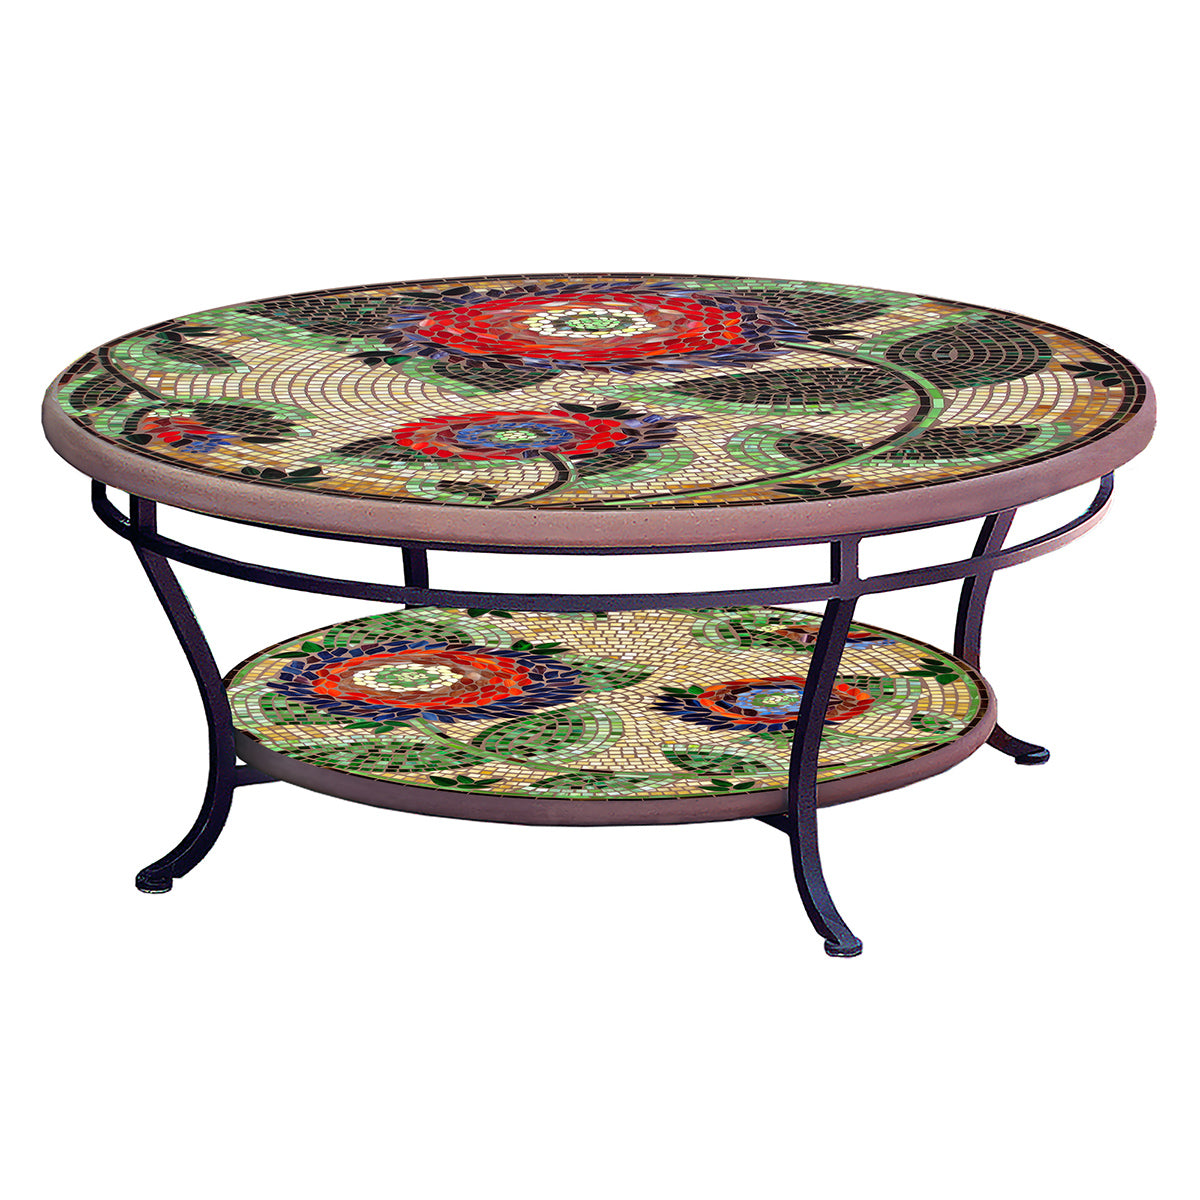 Dahlia Mosaic Coffee Table - Tiered-Iron Accents